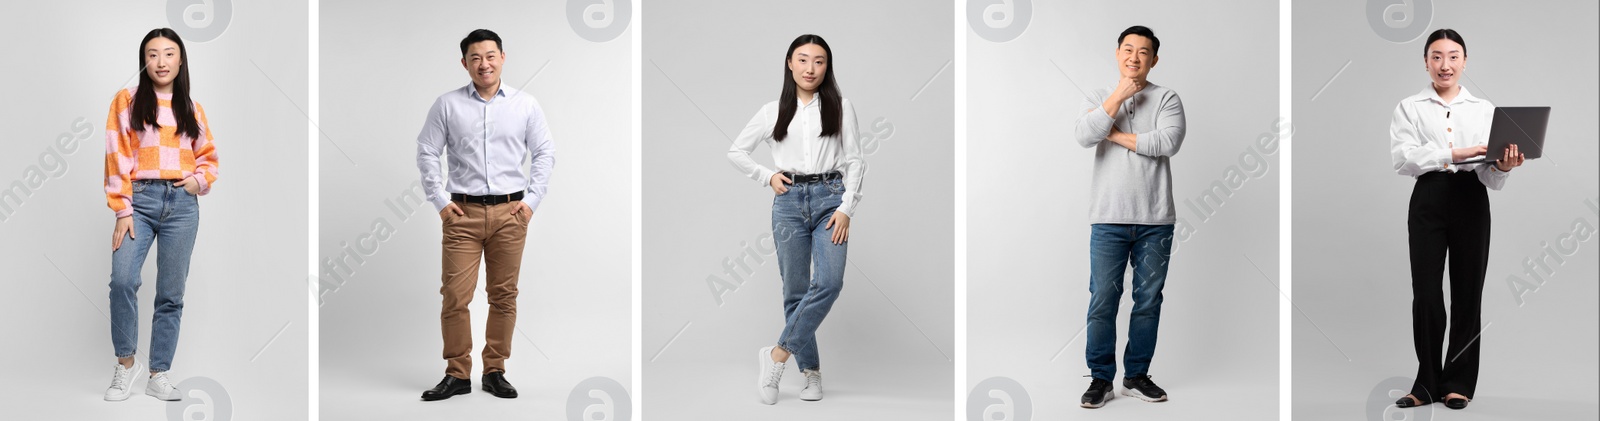 Image of Full length portraits of Asian woman and man on grey background, set with photos